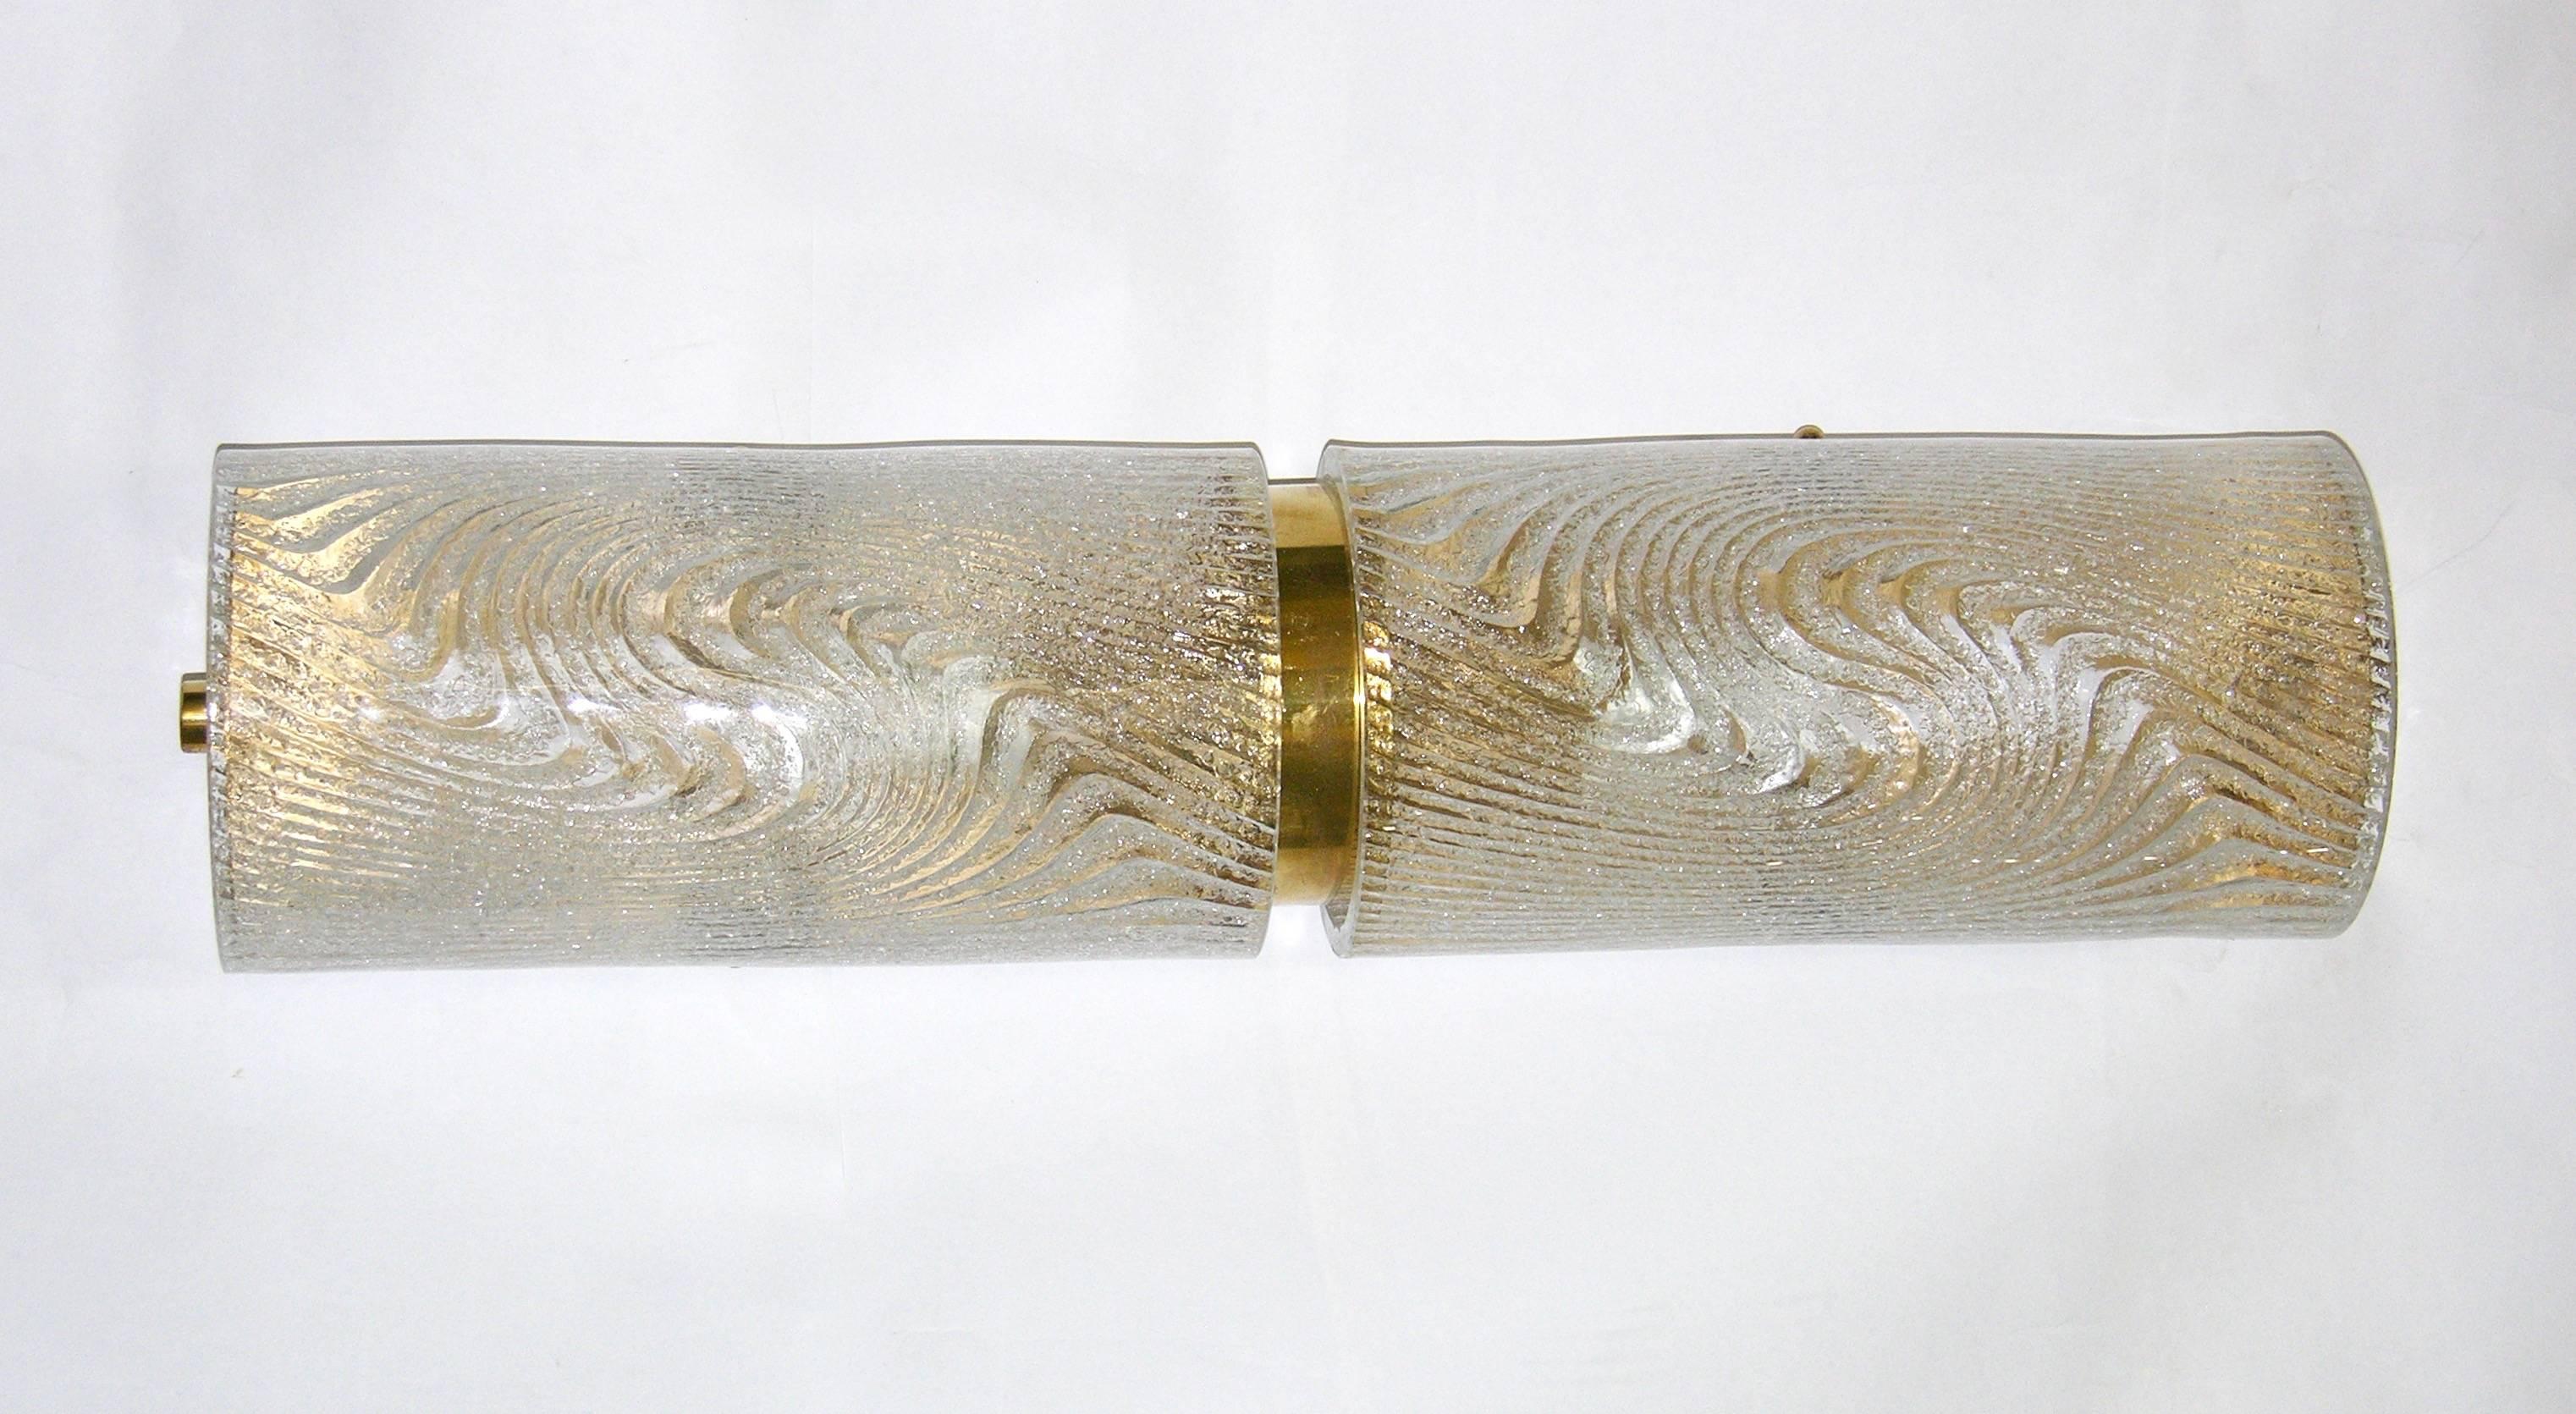 A very elegant pair of lights mounted on a handmade brass structure with curved Murano glasses sophisticatedly decorated on reserve with an attractive swirling frosted pattern. This technique, allowing the brass to show through the decor, confers a